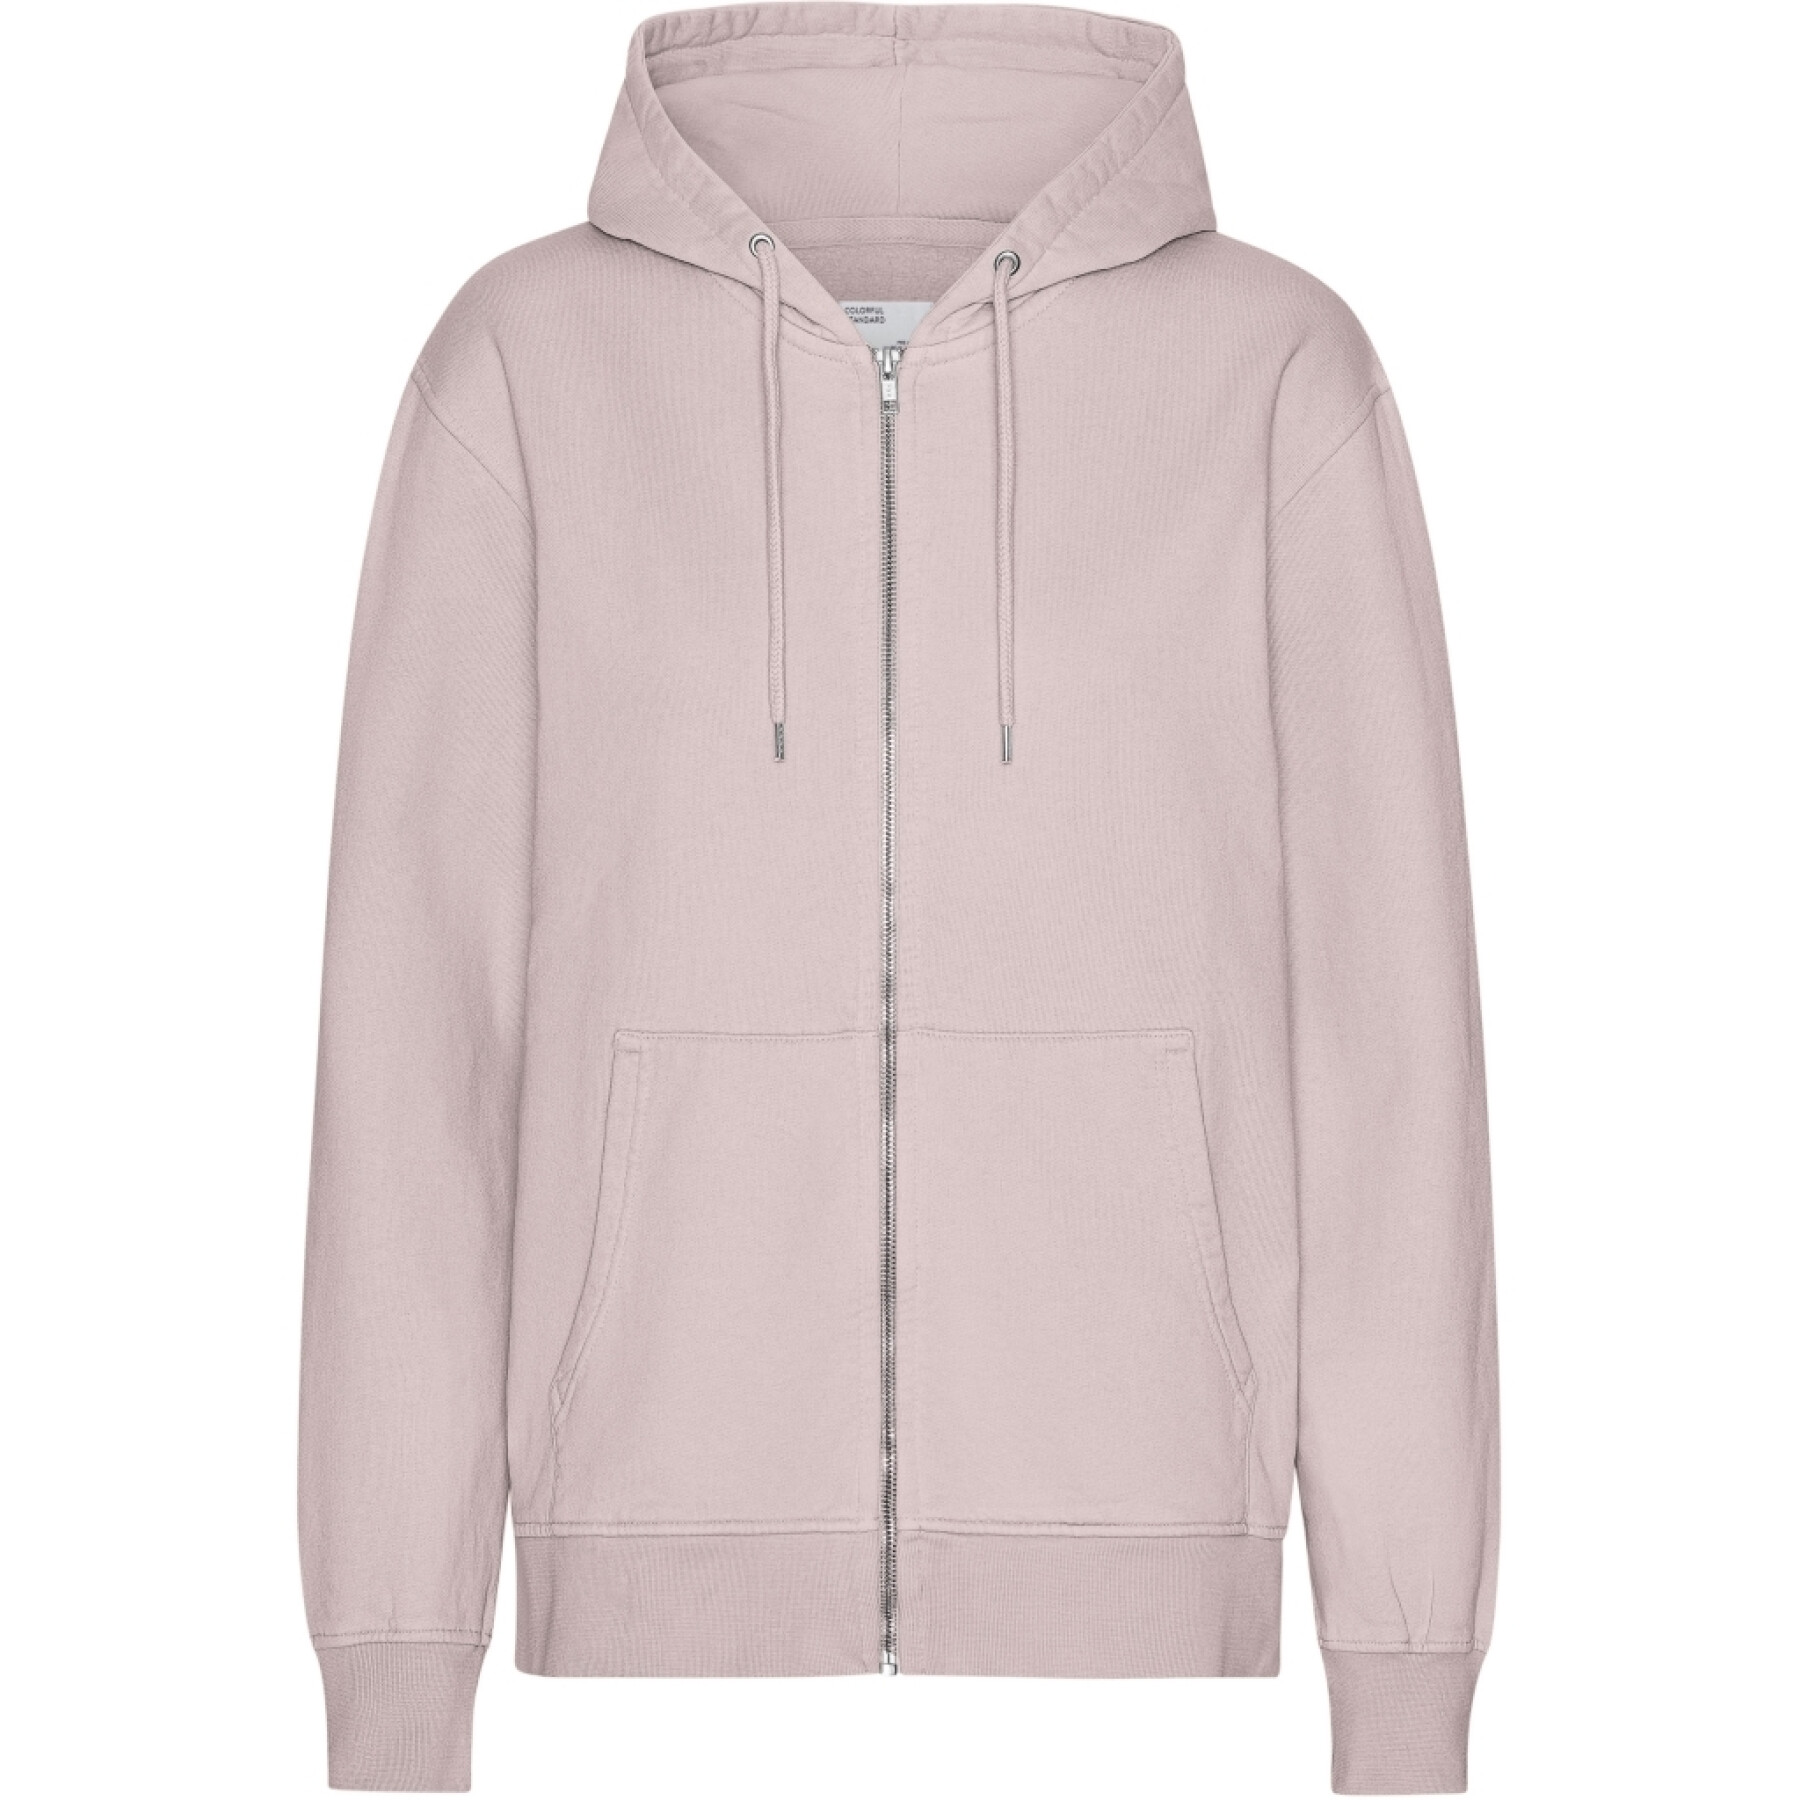 Zip-up hoodie Colorful Standard Classic Organic Faded Pink